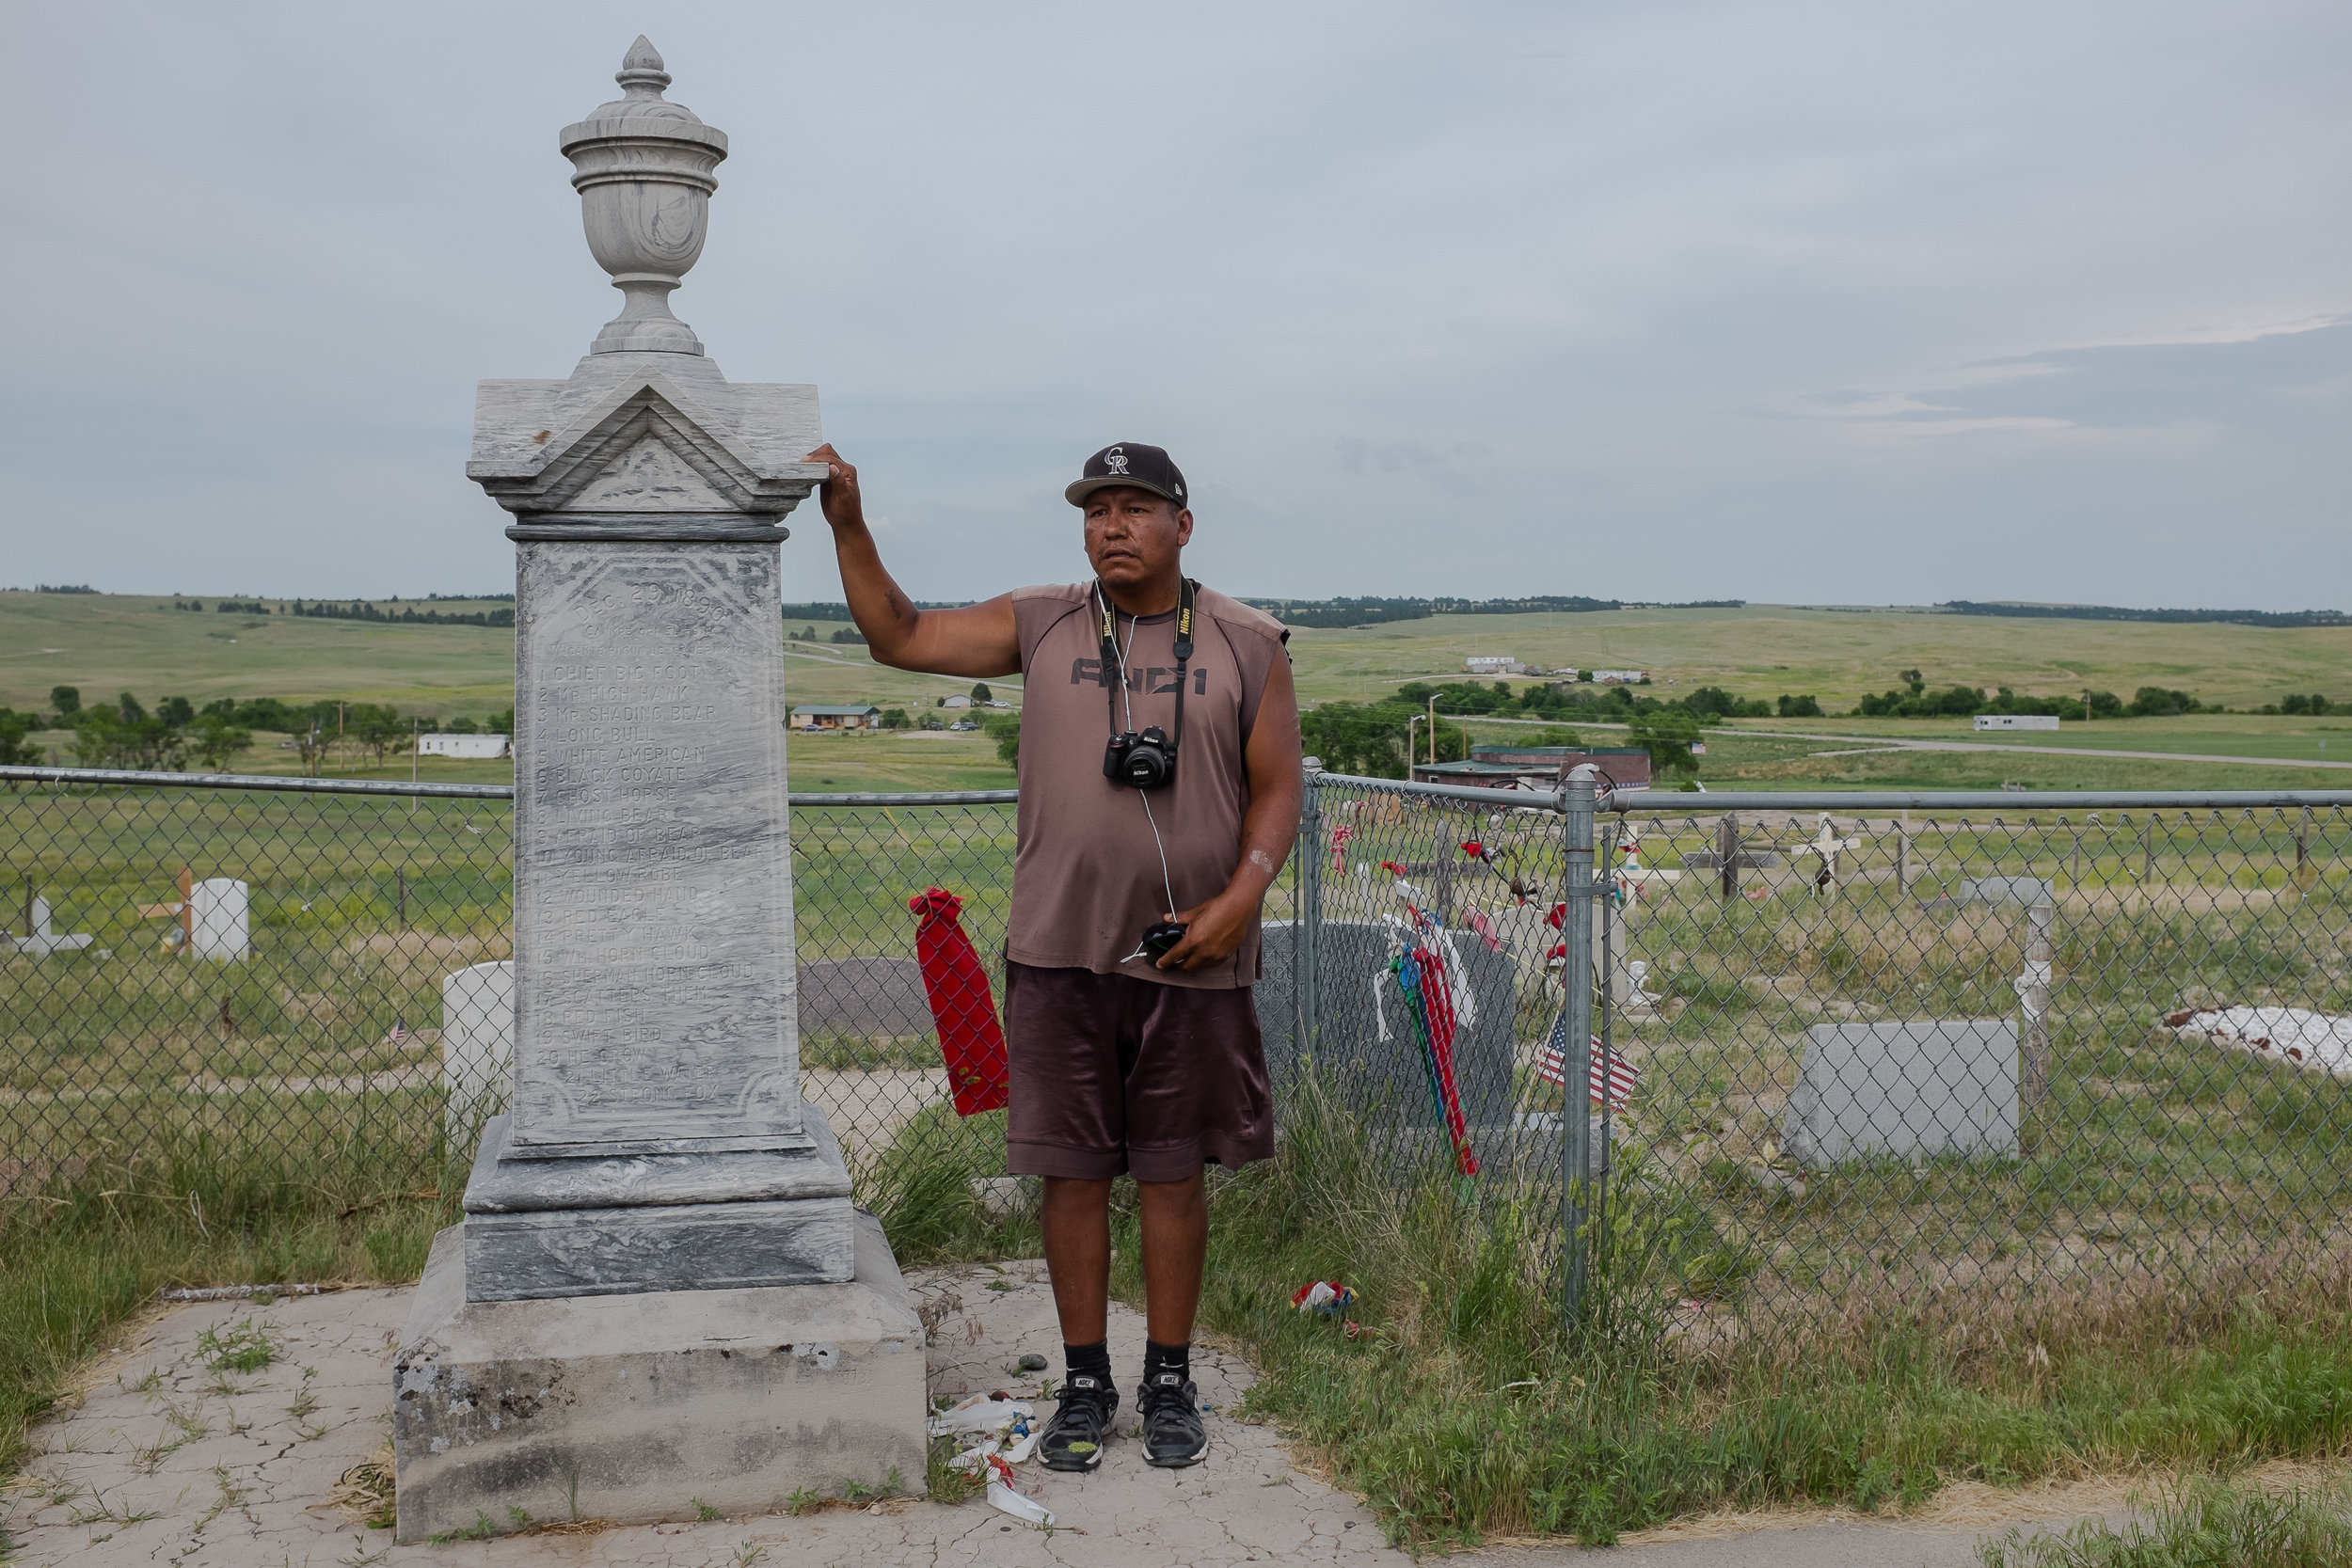  The mass grave on the Pine Ridge Reservation, Wounded Knee, South Dakota. In 1890, hundreds of unarmed Lakota men, women and children were massacred by the U.S. Army there and buried in a shallow mass grave. The soldiers were awarded the Medal of Ho